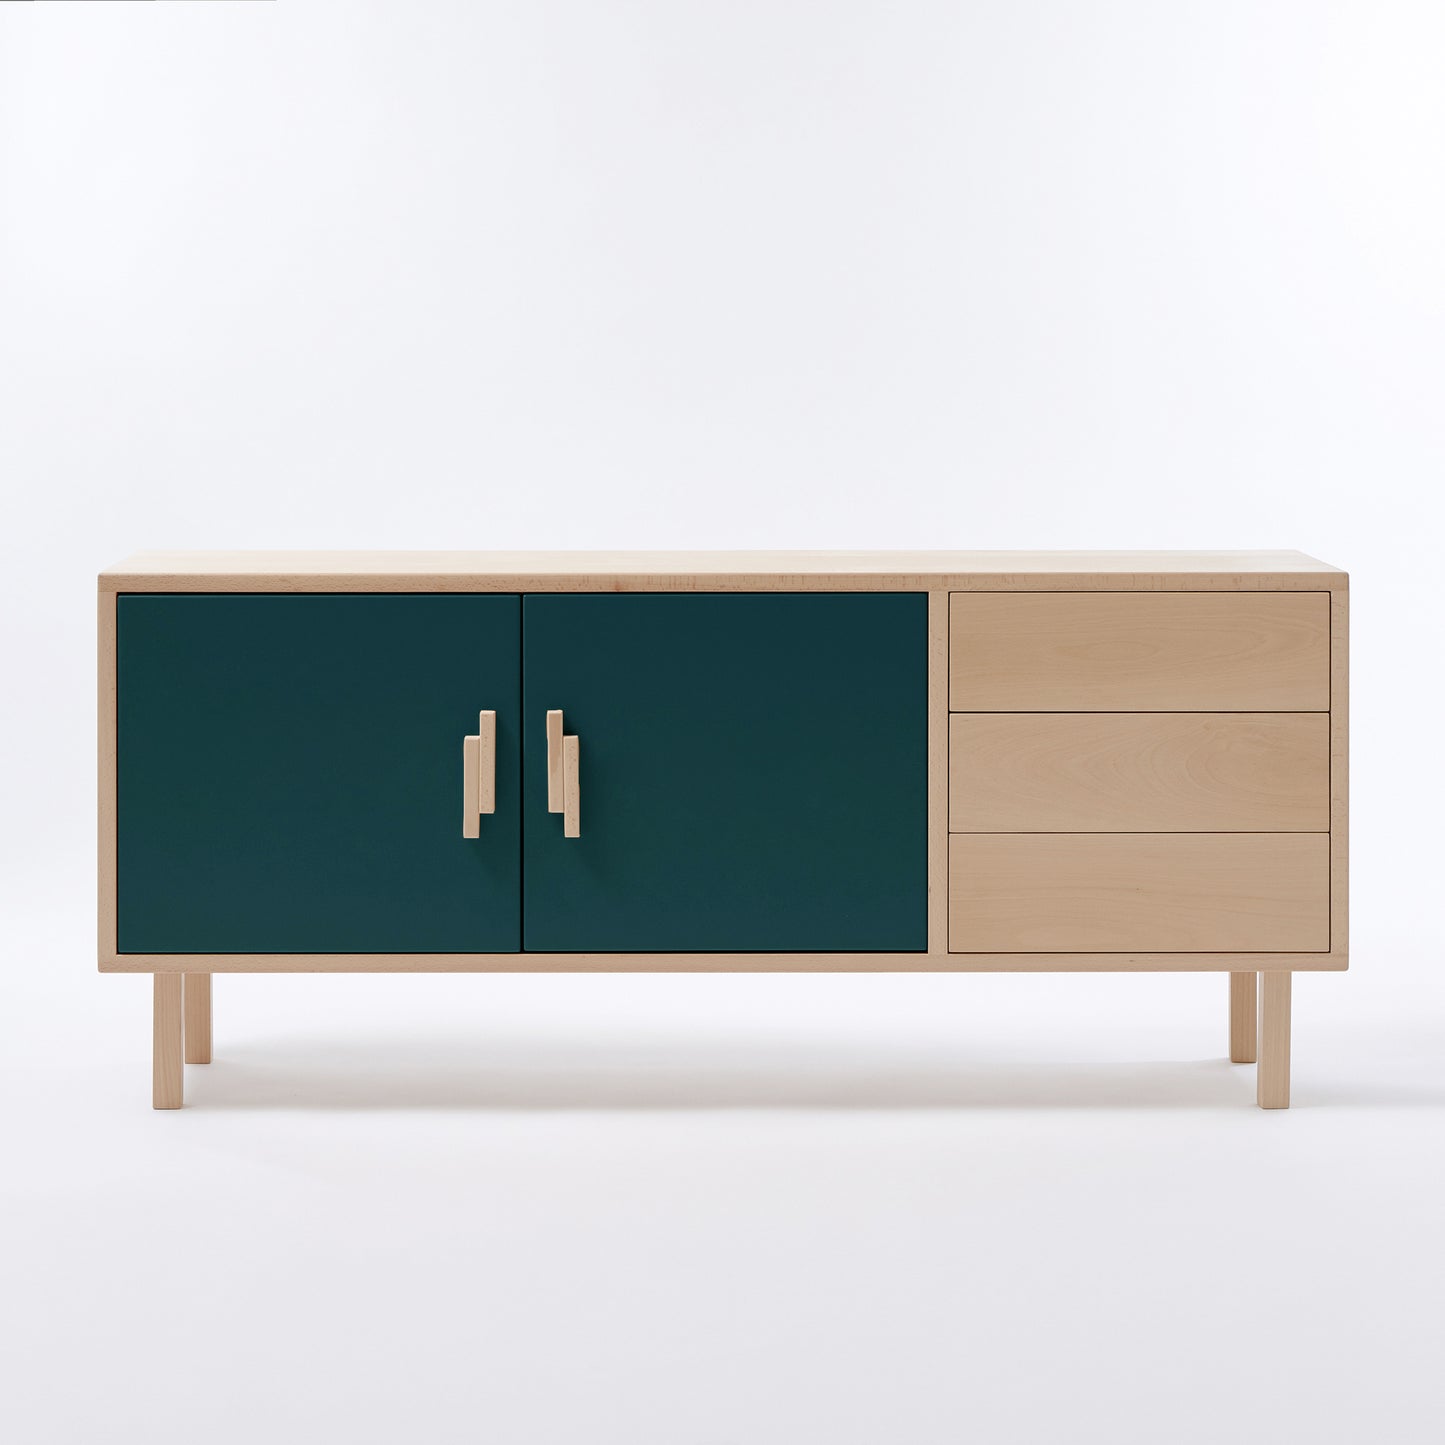 INVADER sideboard 160 cm - with drawers